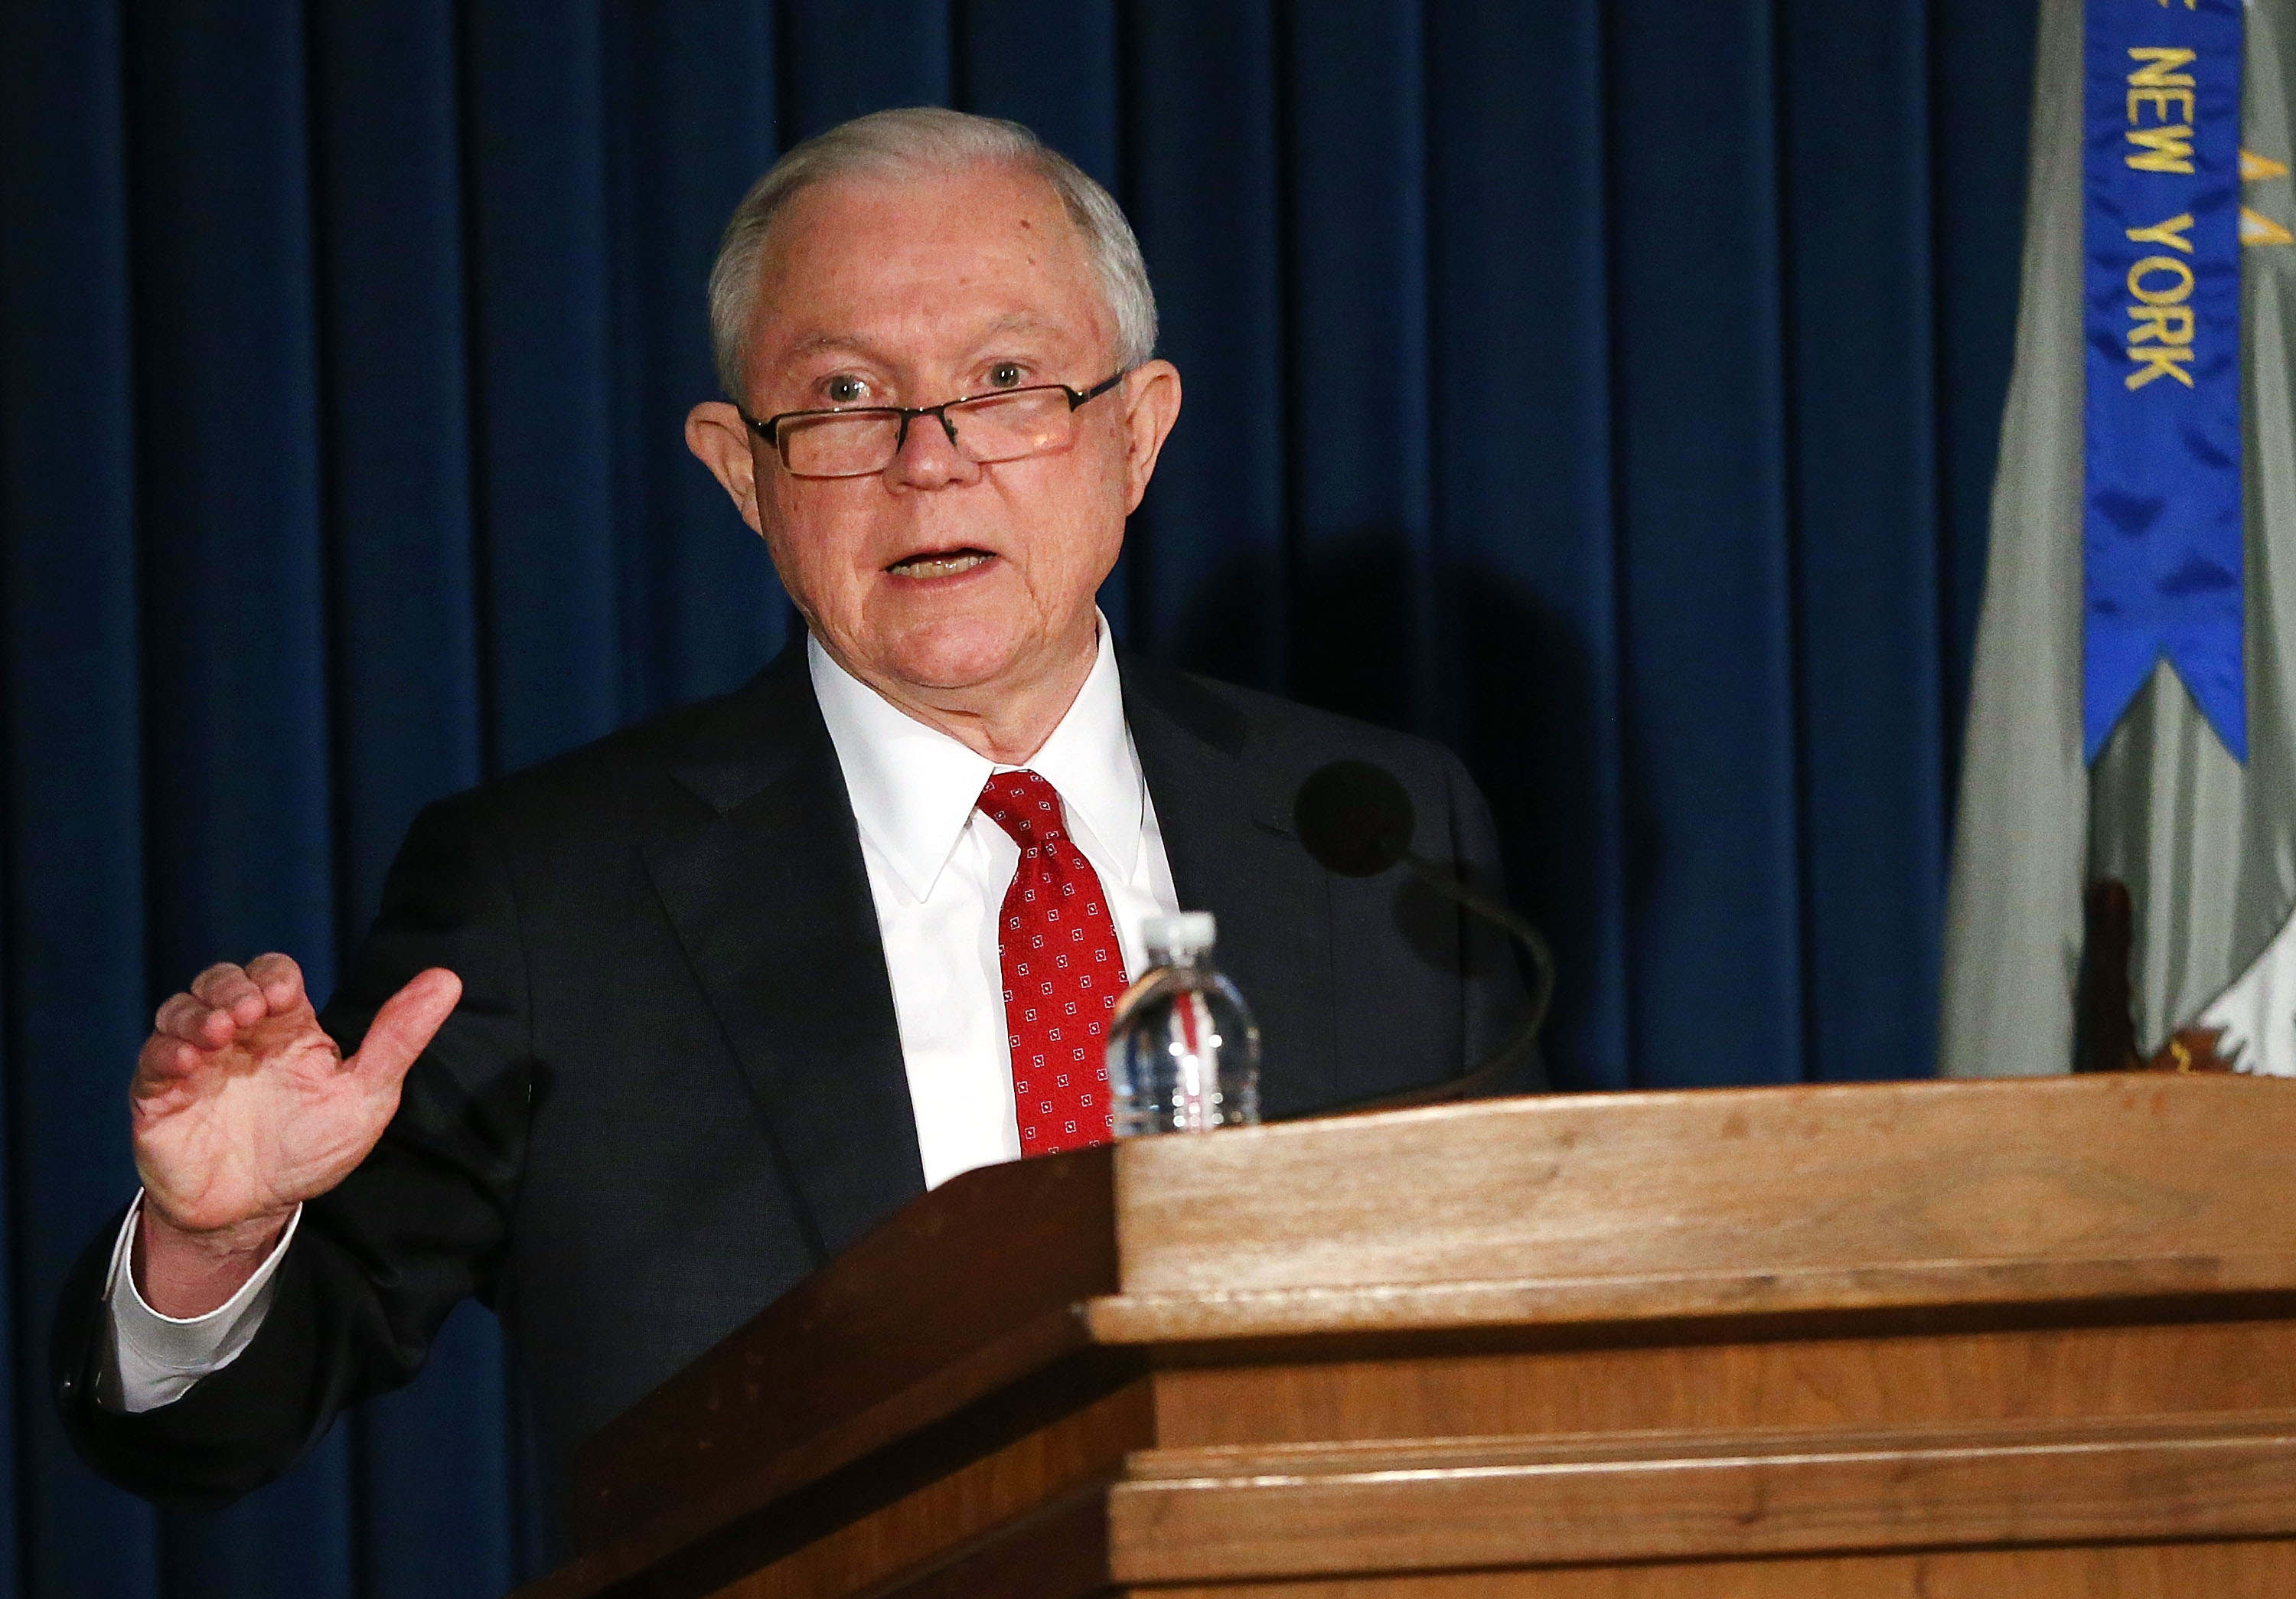 Attorney General Jeff Sessions speaks about domestic security in New York on November 2, 2017 in New York City. (Spencer Platt—Getty Images)